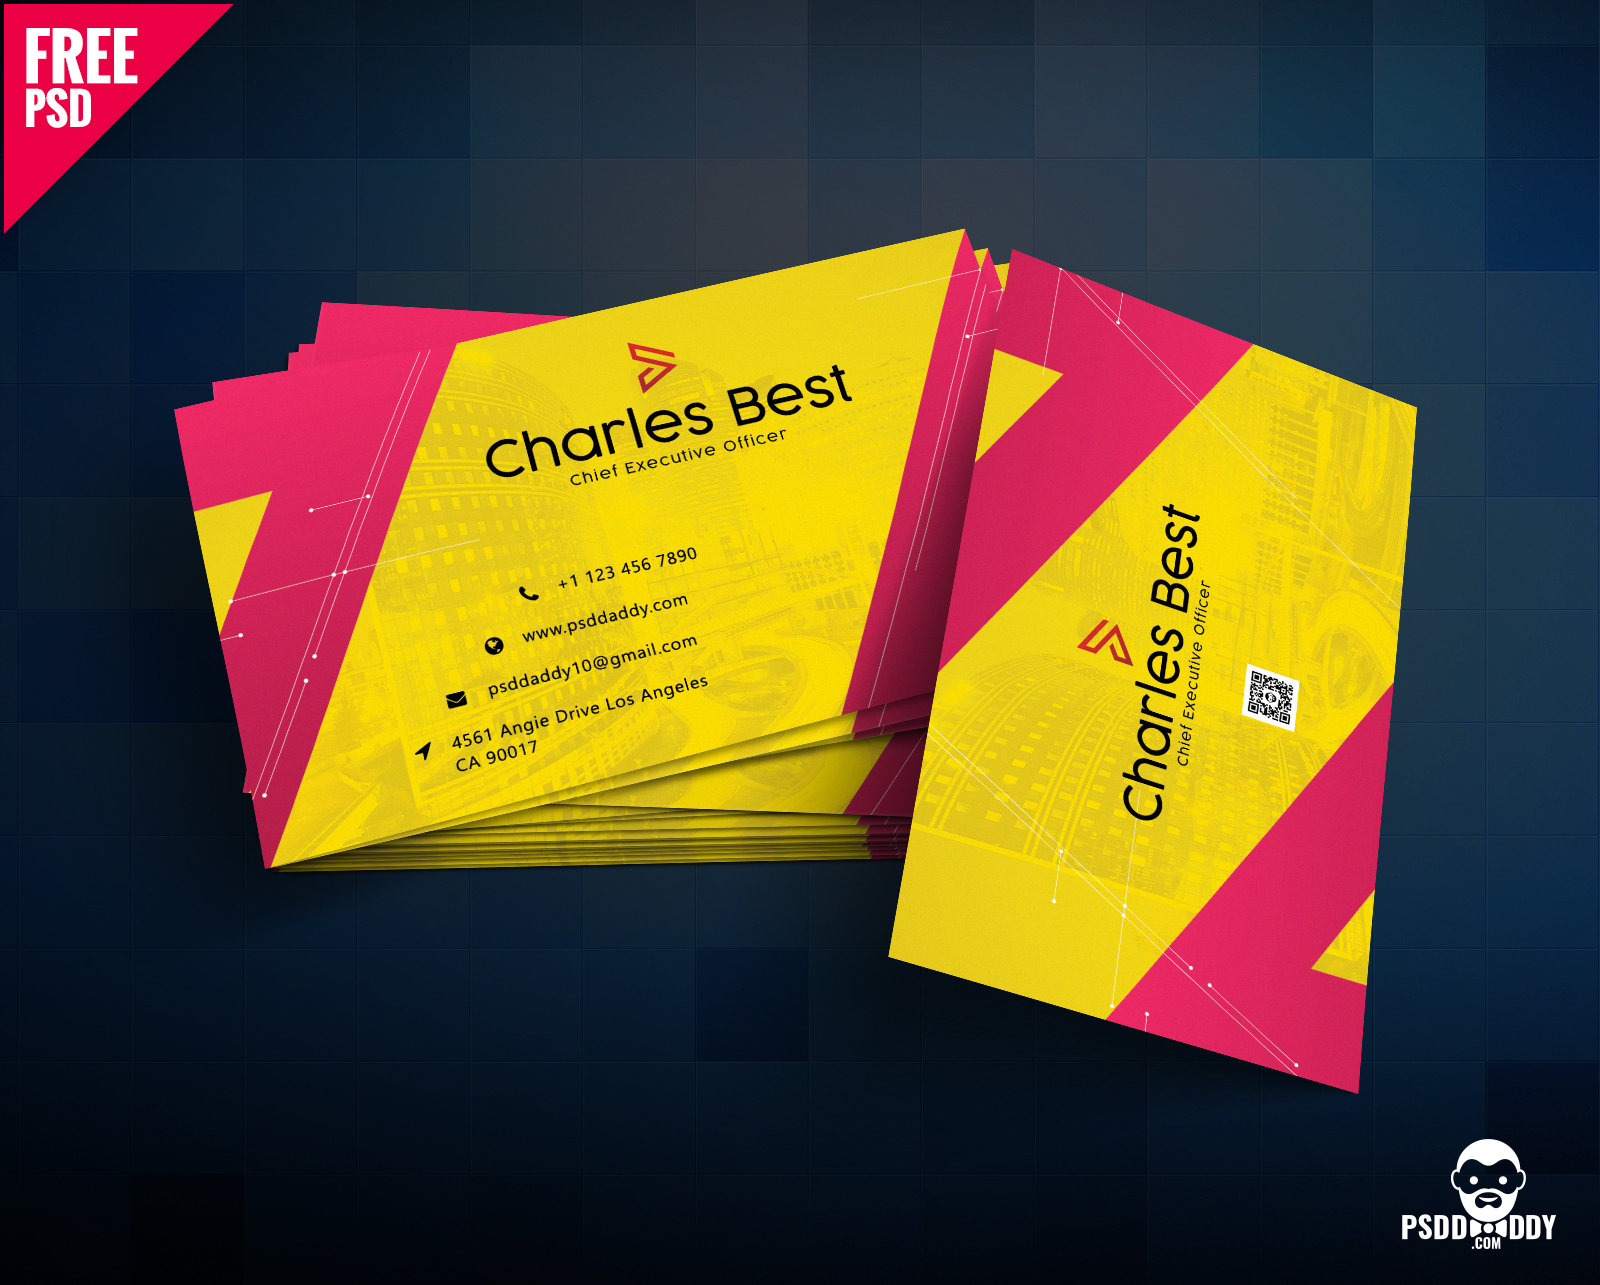 011 Free Business Card Psd Template Cover Staggering Ideas Within Construction Business Card Templates Download Free